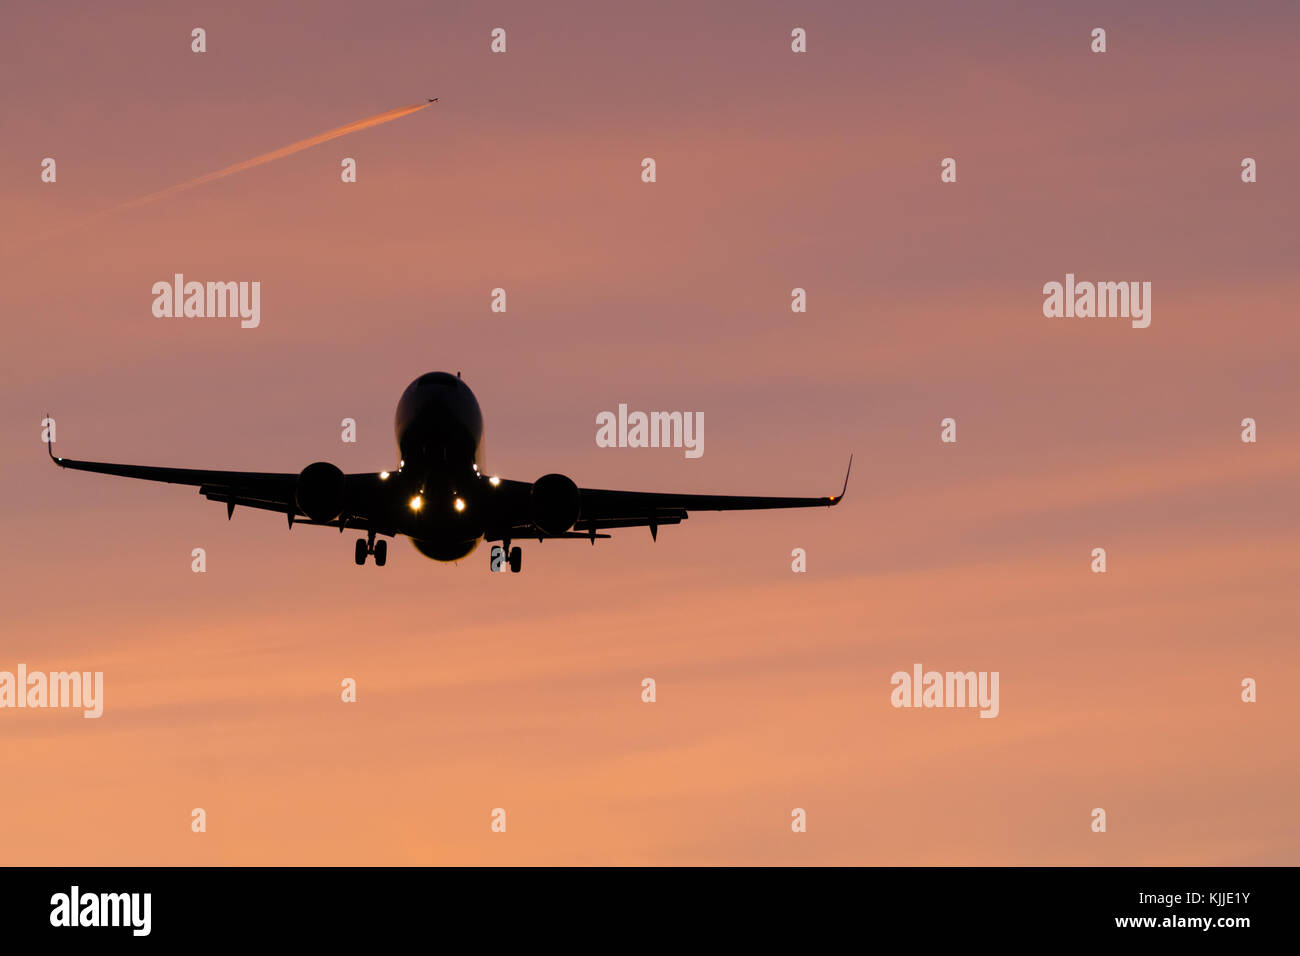 plane will land in orange air and a other plane with fuel outgassing in the background Stock Photo